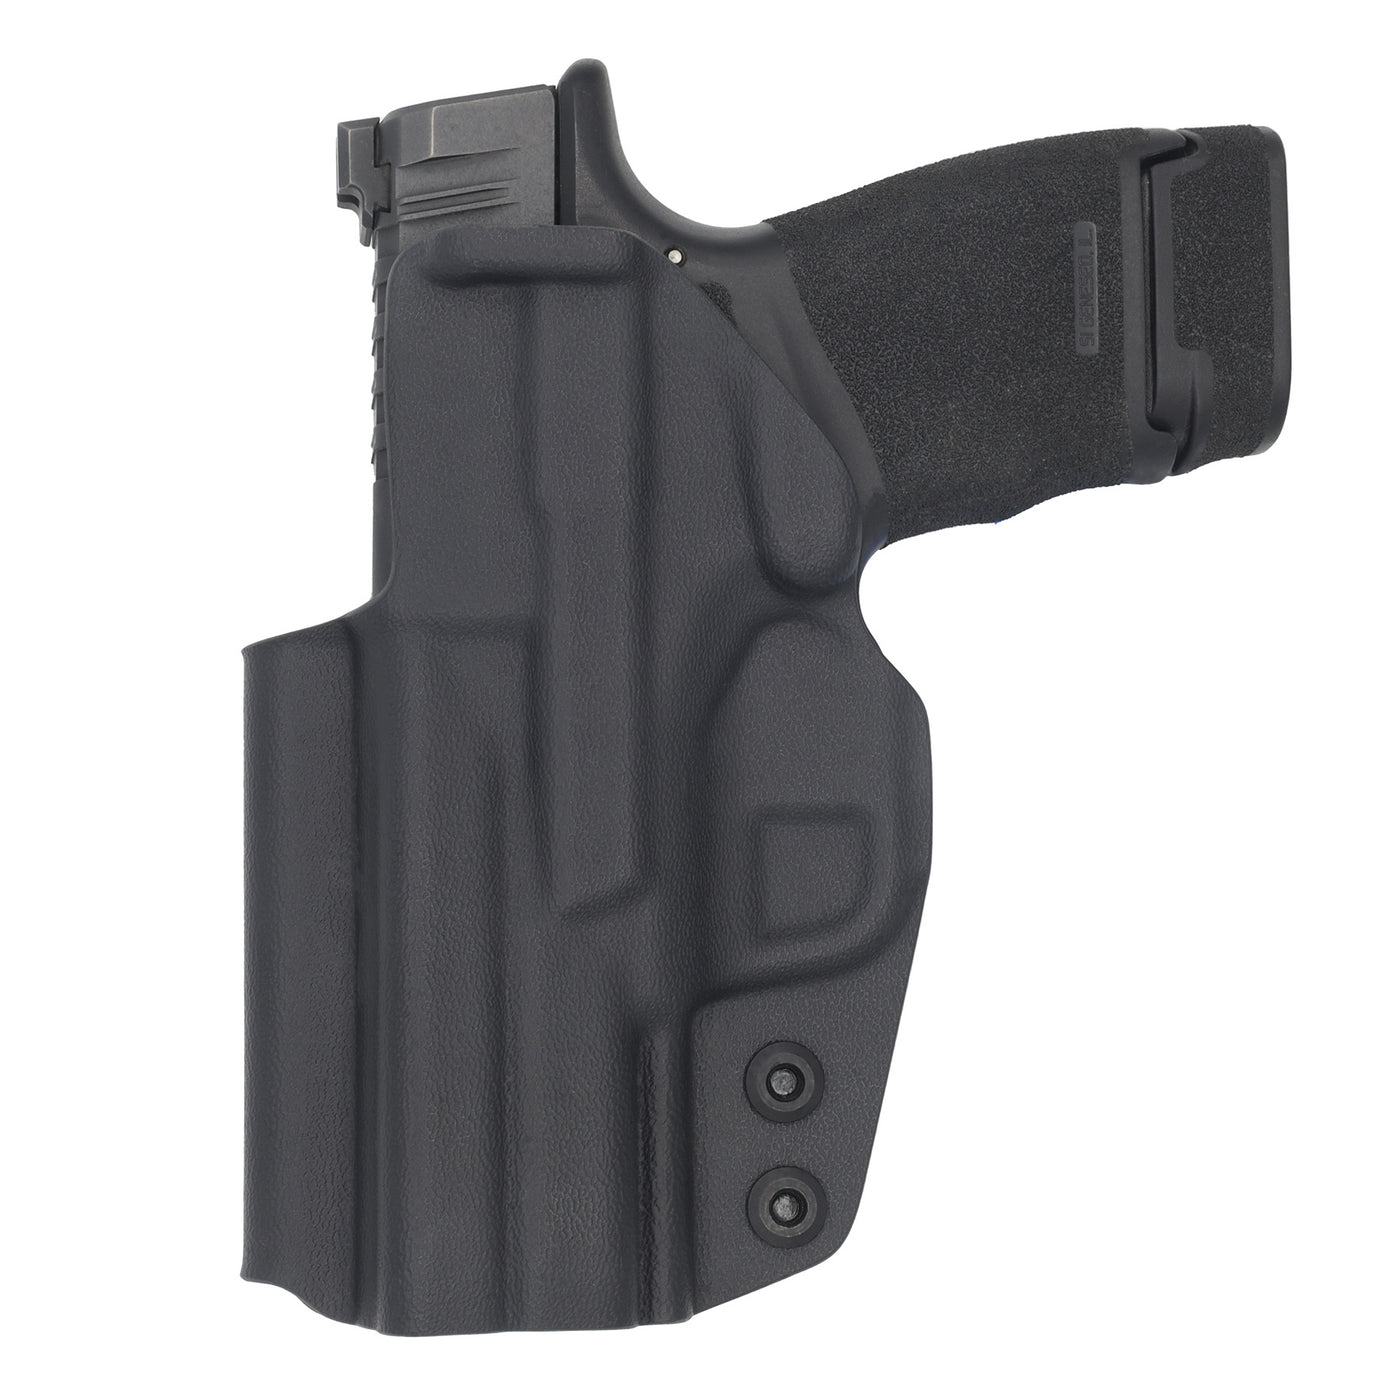 Springfield Hellcat IWB kydex holster made by C and G Holsters. Photo is of the rear.